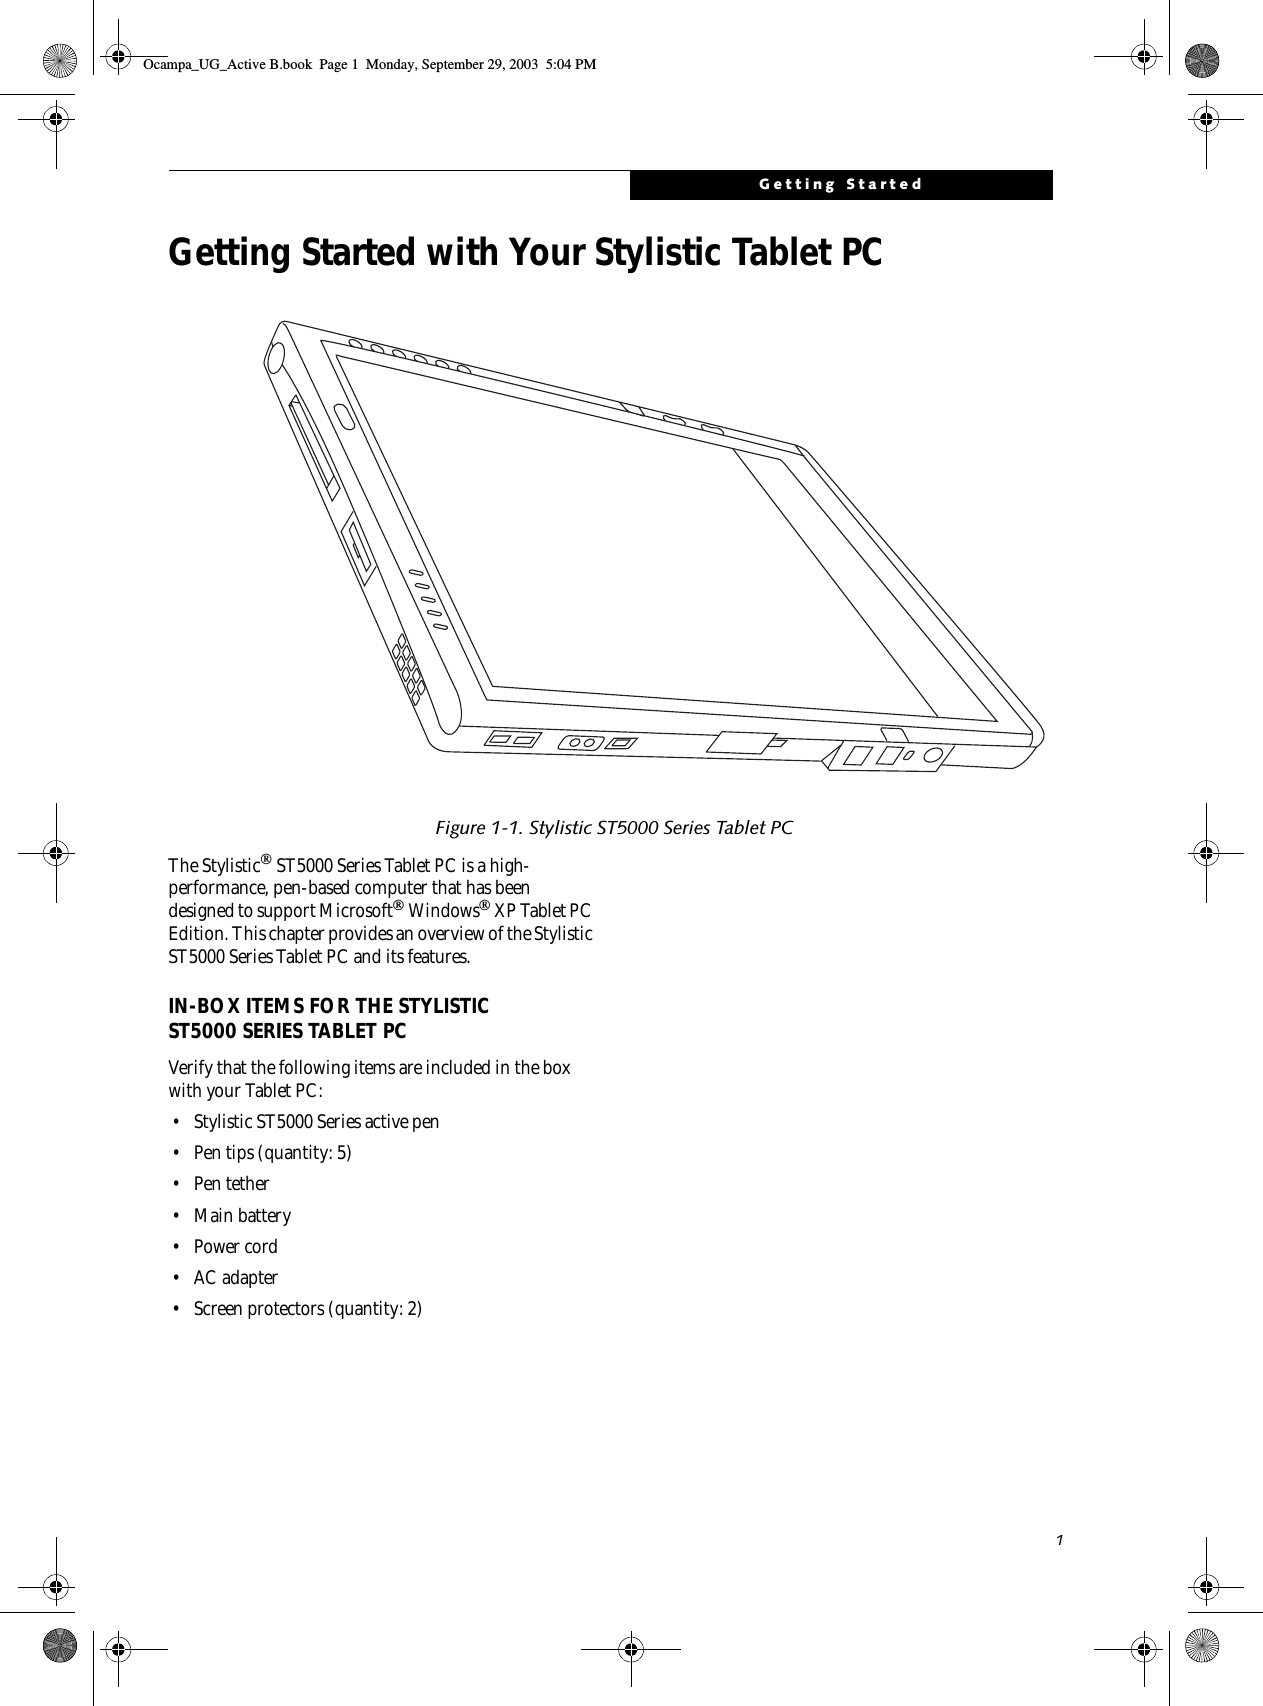 1Getting StartedGetting Started with Your Stylistic Tablet PCFigure 1-1. Stylistic ST5000 Series Tablet PCThe Stylistic ST5000 Series Tablet PC is a high-performance, pen-based computer that has been designed to support Microsoft Windows XP Tablet PC Edition. This chapter provides an overview of the Stylistic ST5000 Series Tablet PC and its features.IN-BOX ITEMS FOR THE STYLISTIC ST5000 SERIES TABLET PCVerify that the following items are included in the box with your Tablet PC: • Stylistic ST5000 Series active pen• Pen tips (quantity: 5)•Pen tether• Main battery •Power cord• AC adapter• Screen protectors (quantity: 2)Ocampa_UG_Active B.book  Page 1  Monday, September 29, 2003  5:04 PM